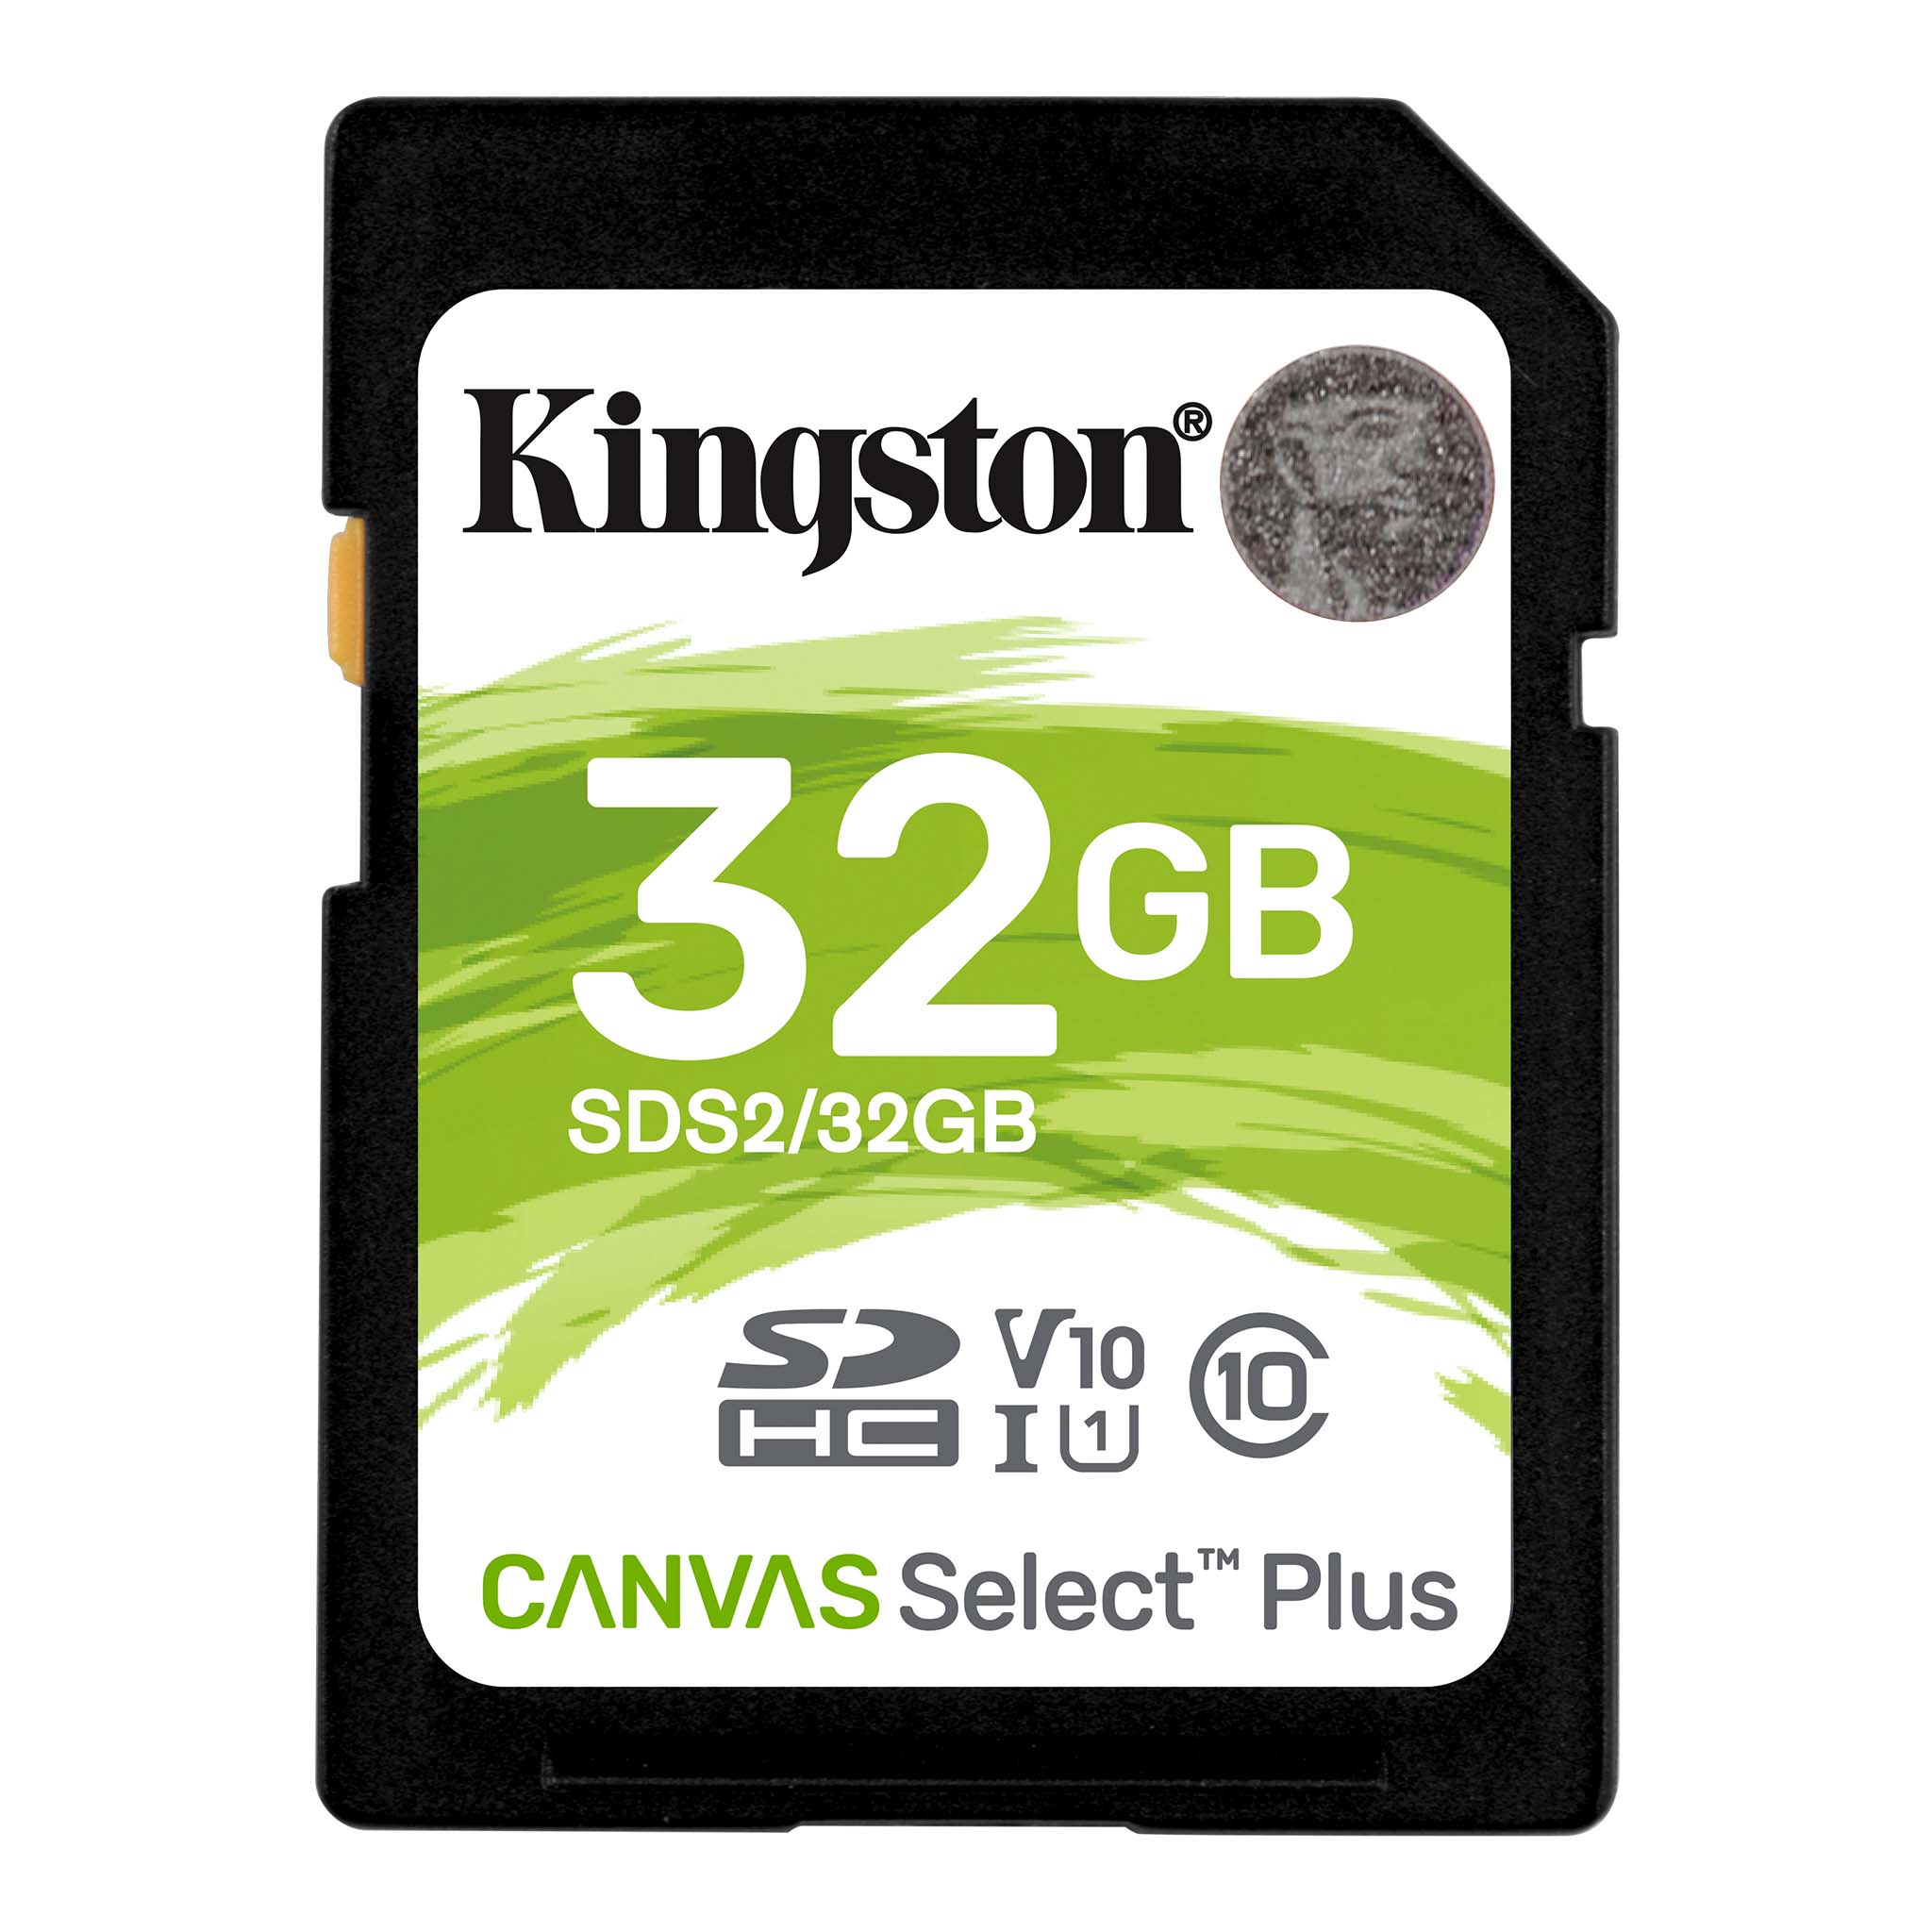 100MBs Works with Kingston Kingston 32GB Micromax Canvas Blaze HD MicroSDHC Canvas Select Plus Card Verified by SanFlash. 